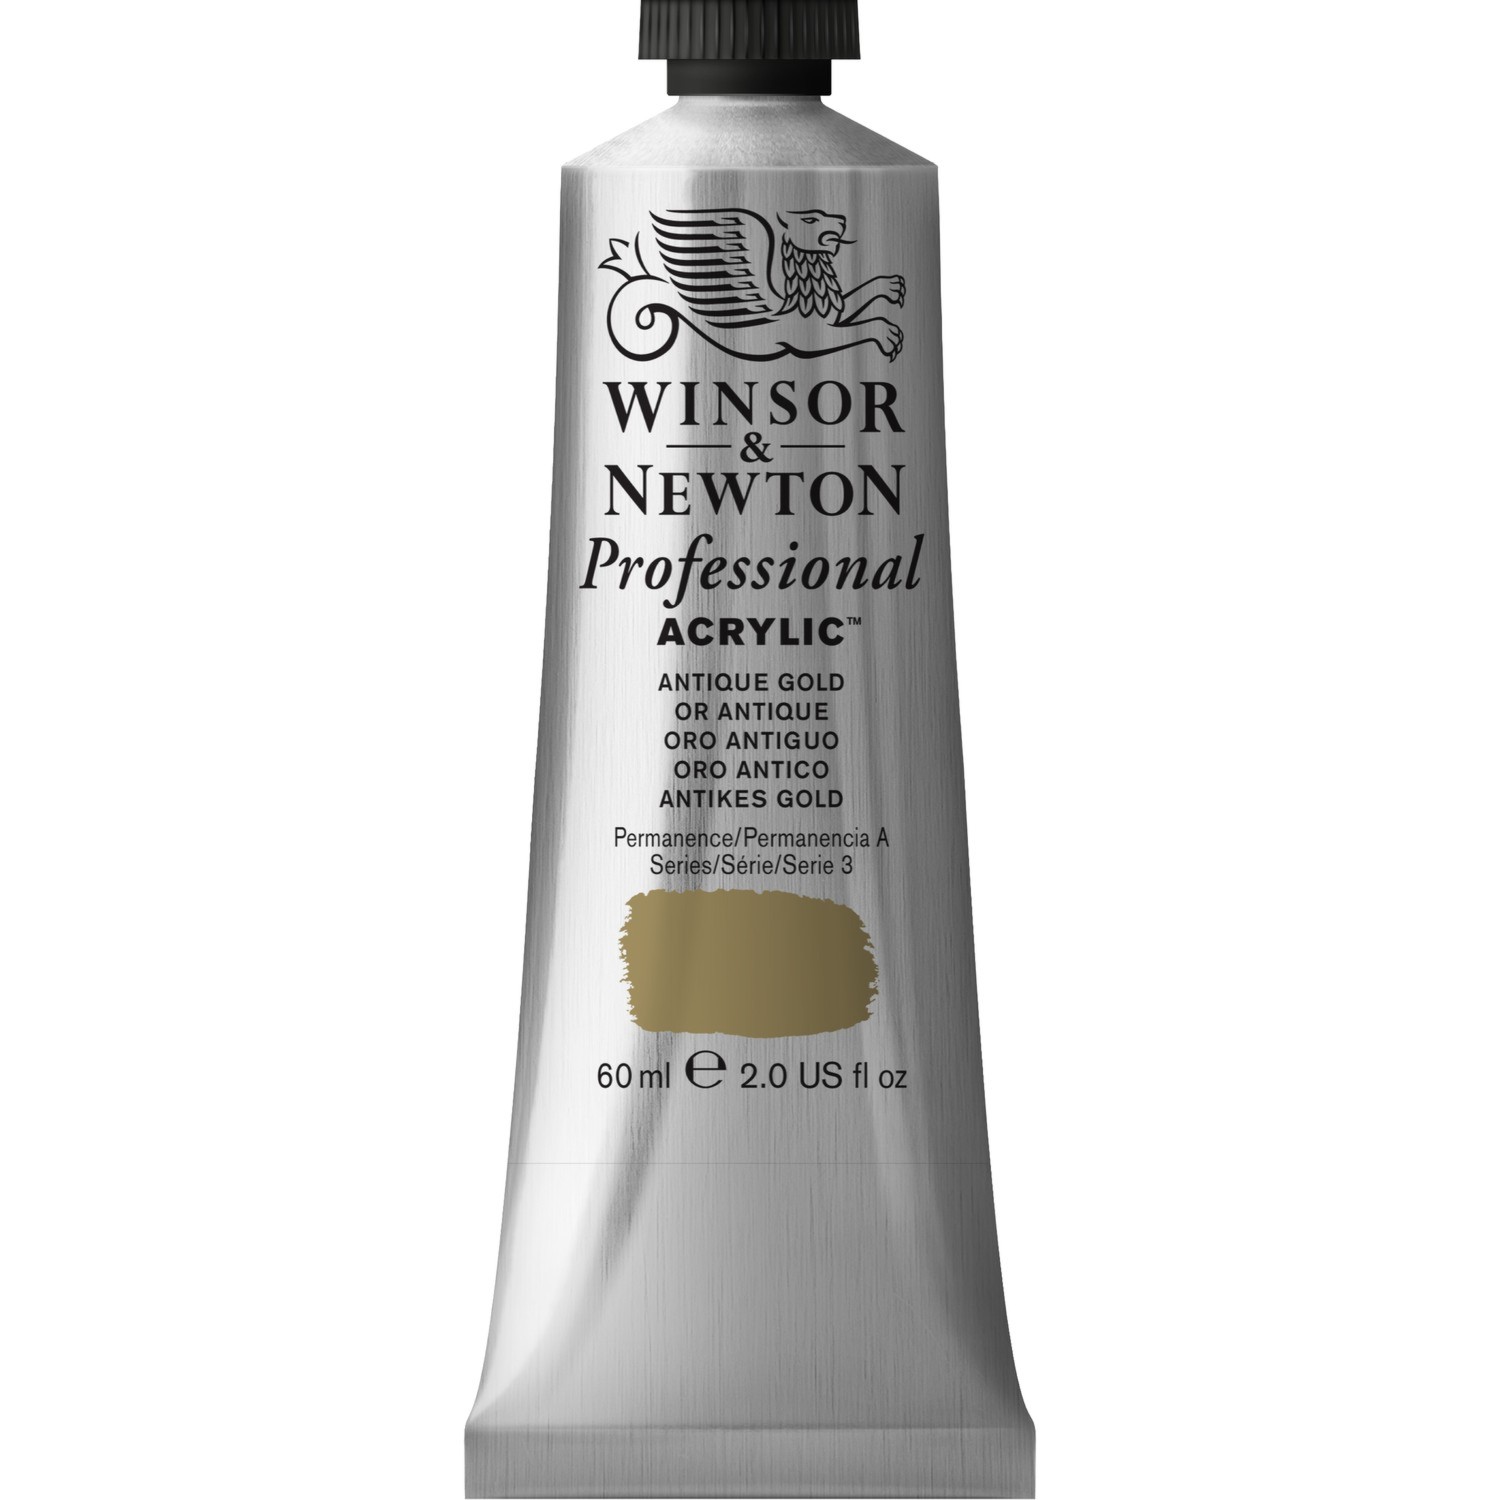 Winsor and Newton 60ml Professional Acrylic Paint - Antique Gold Image 1